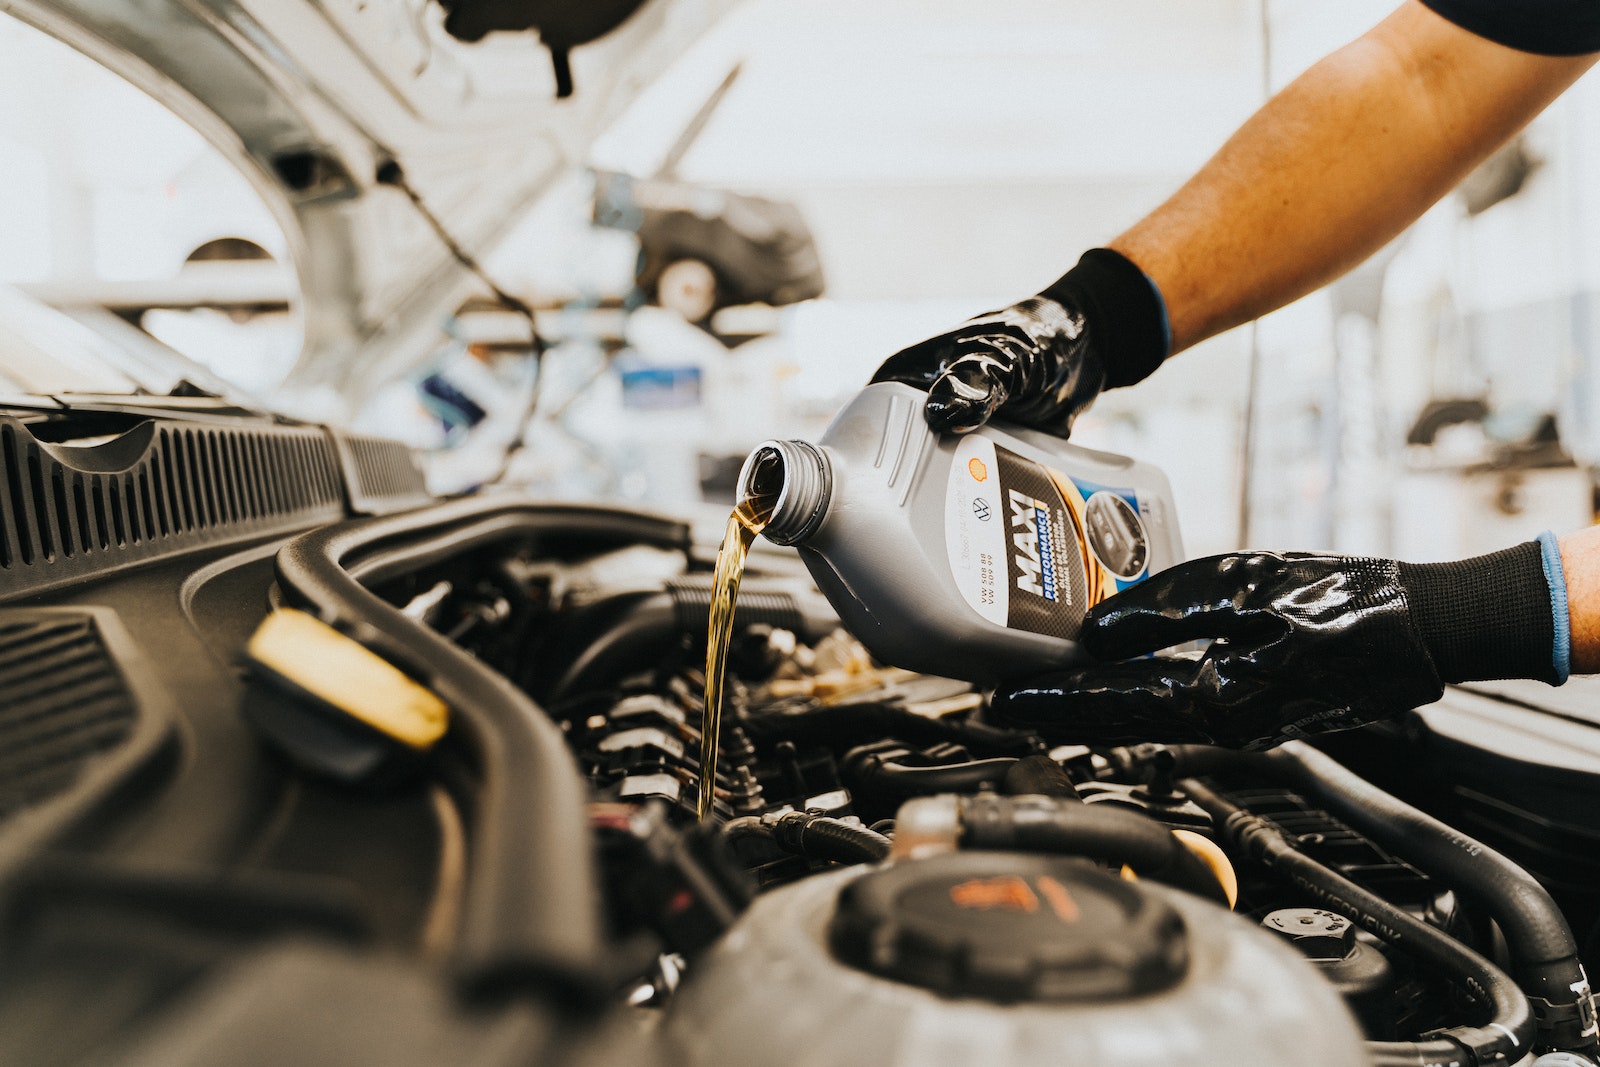 What Are The Fuel Efficiency Benefits Of Using Synthetic Oil